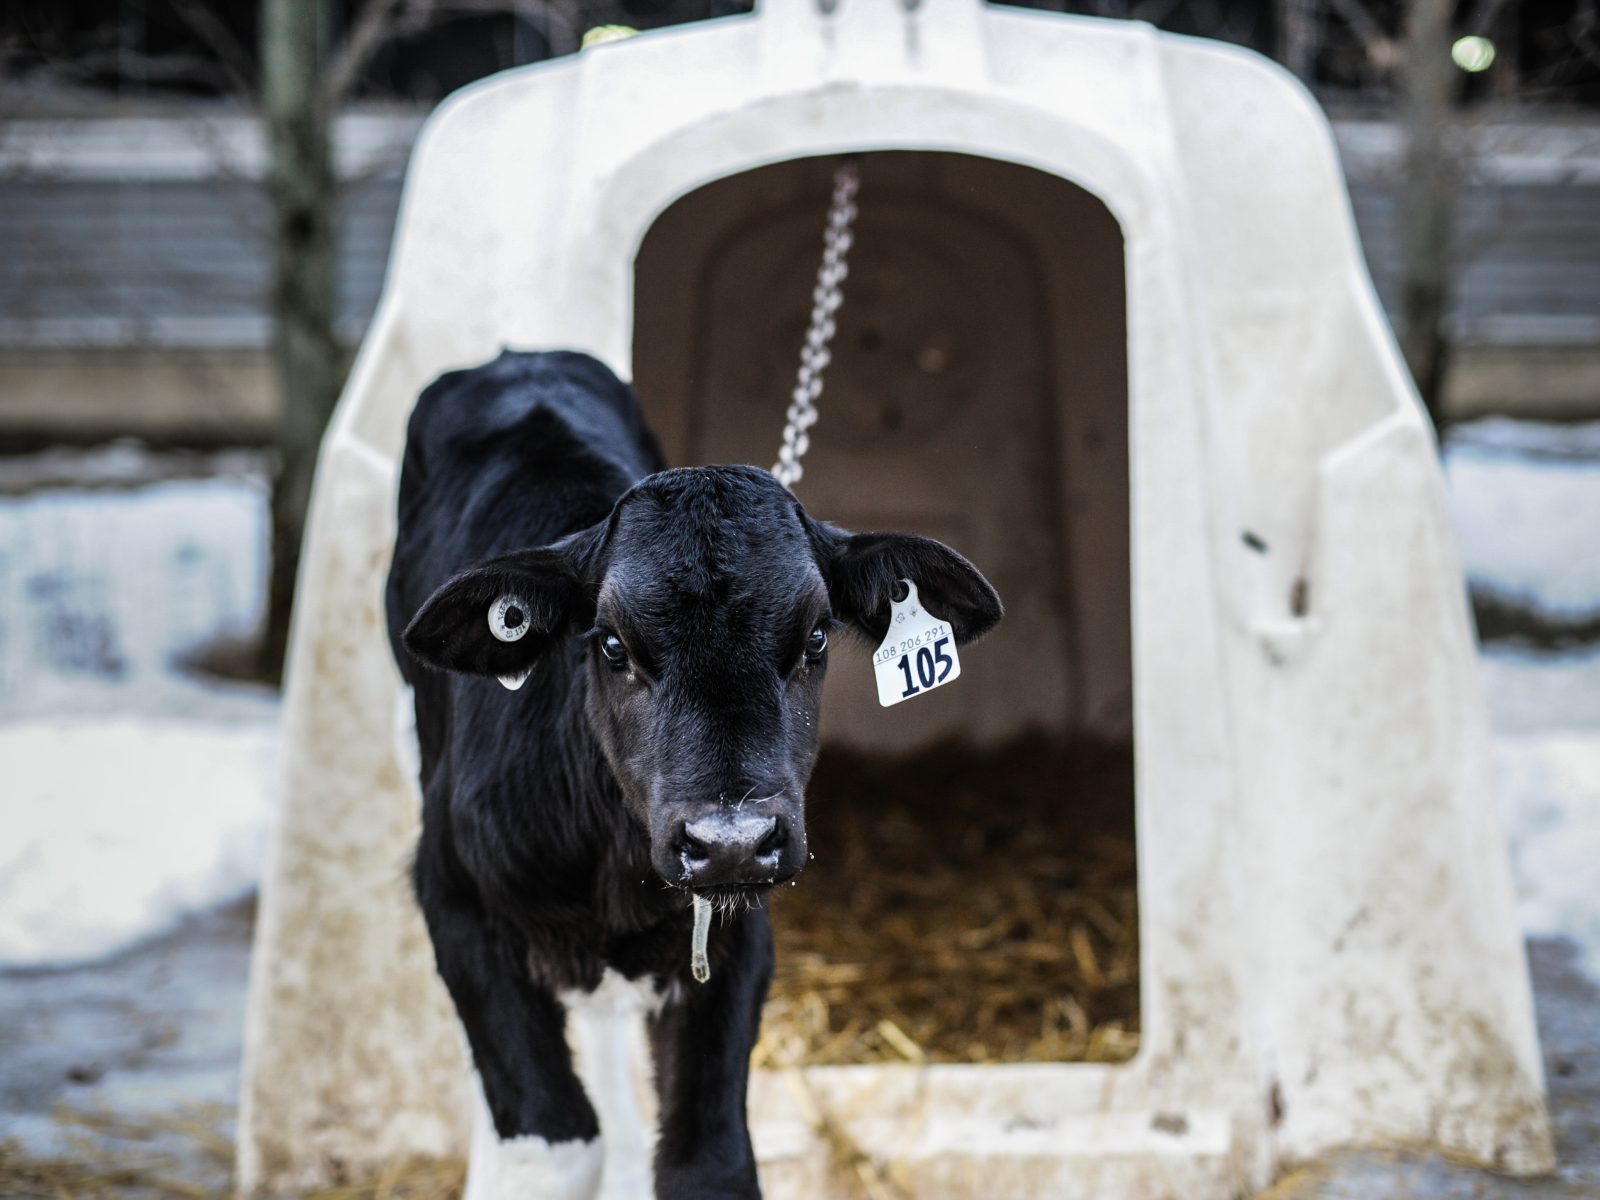 A calf chained to a veal crate throughout the cold winter. Canada, 2014